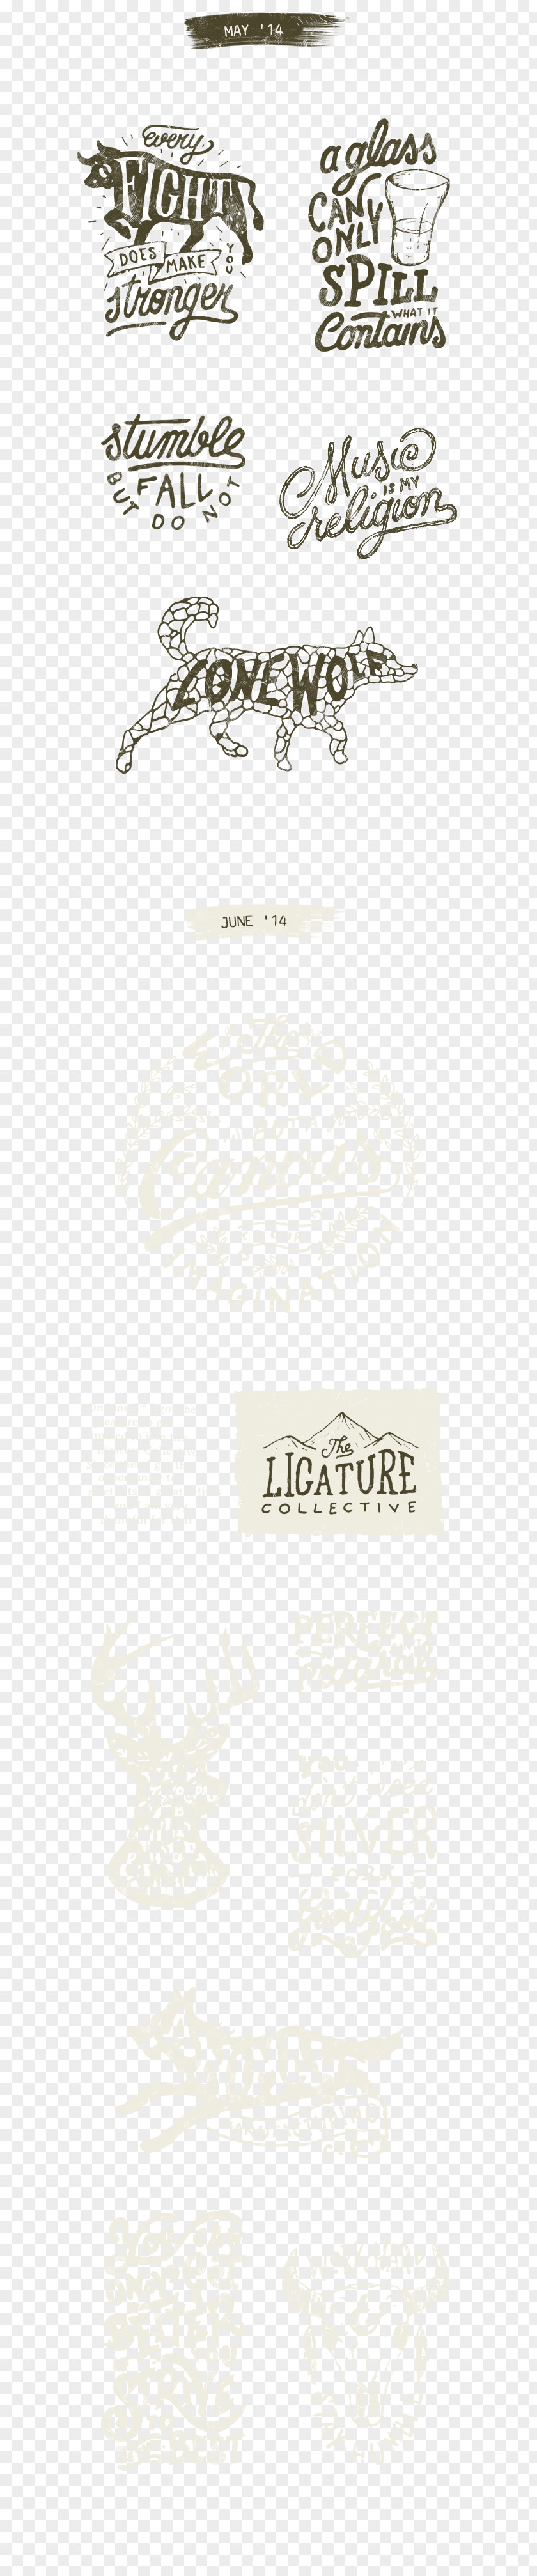 Lettering & Calligraphy Typography Design PNG